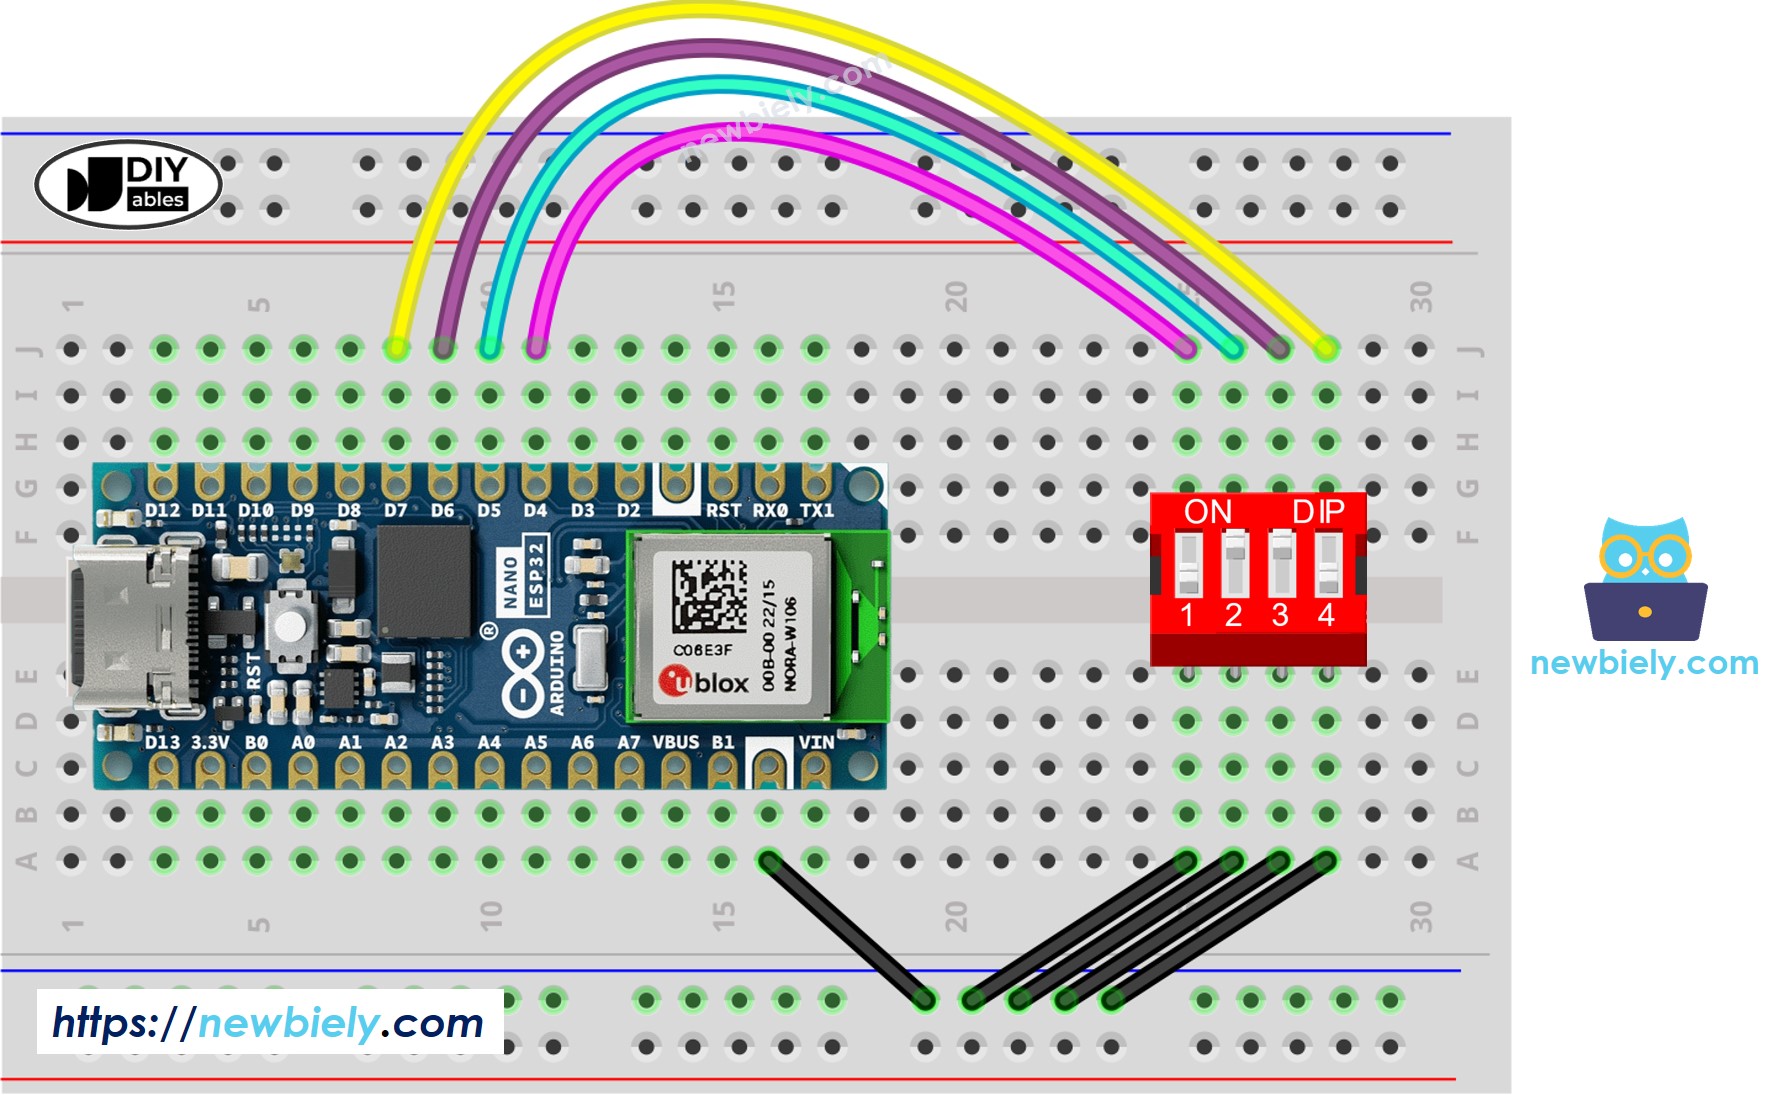 The wiring diagram between Arduino Nano ESP32 and DIP switch